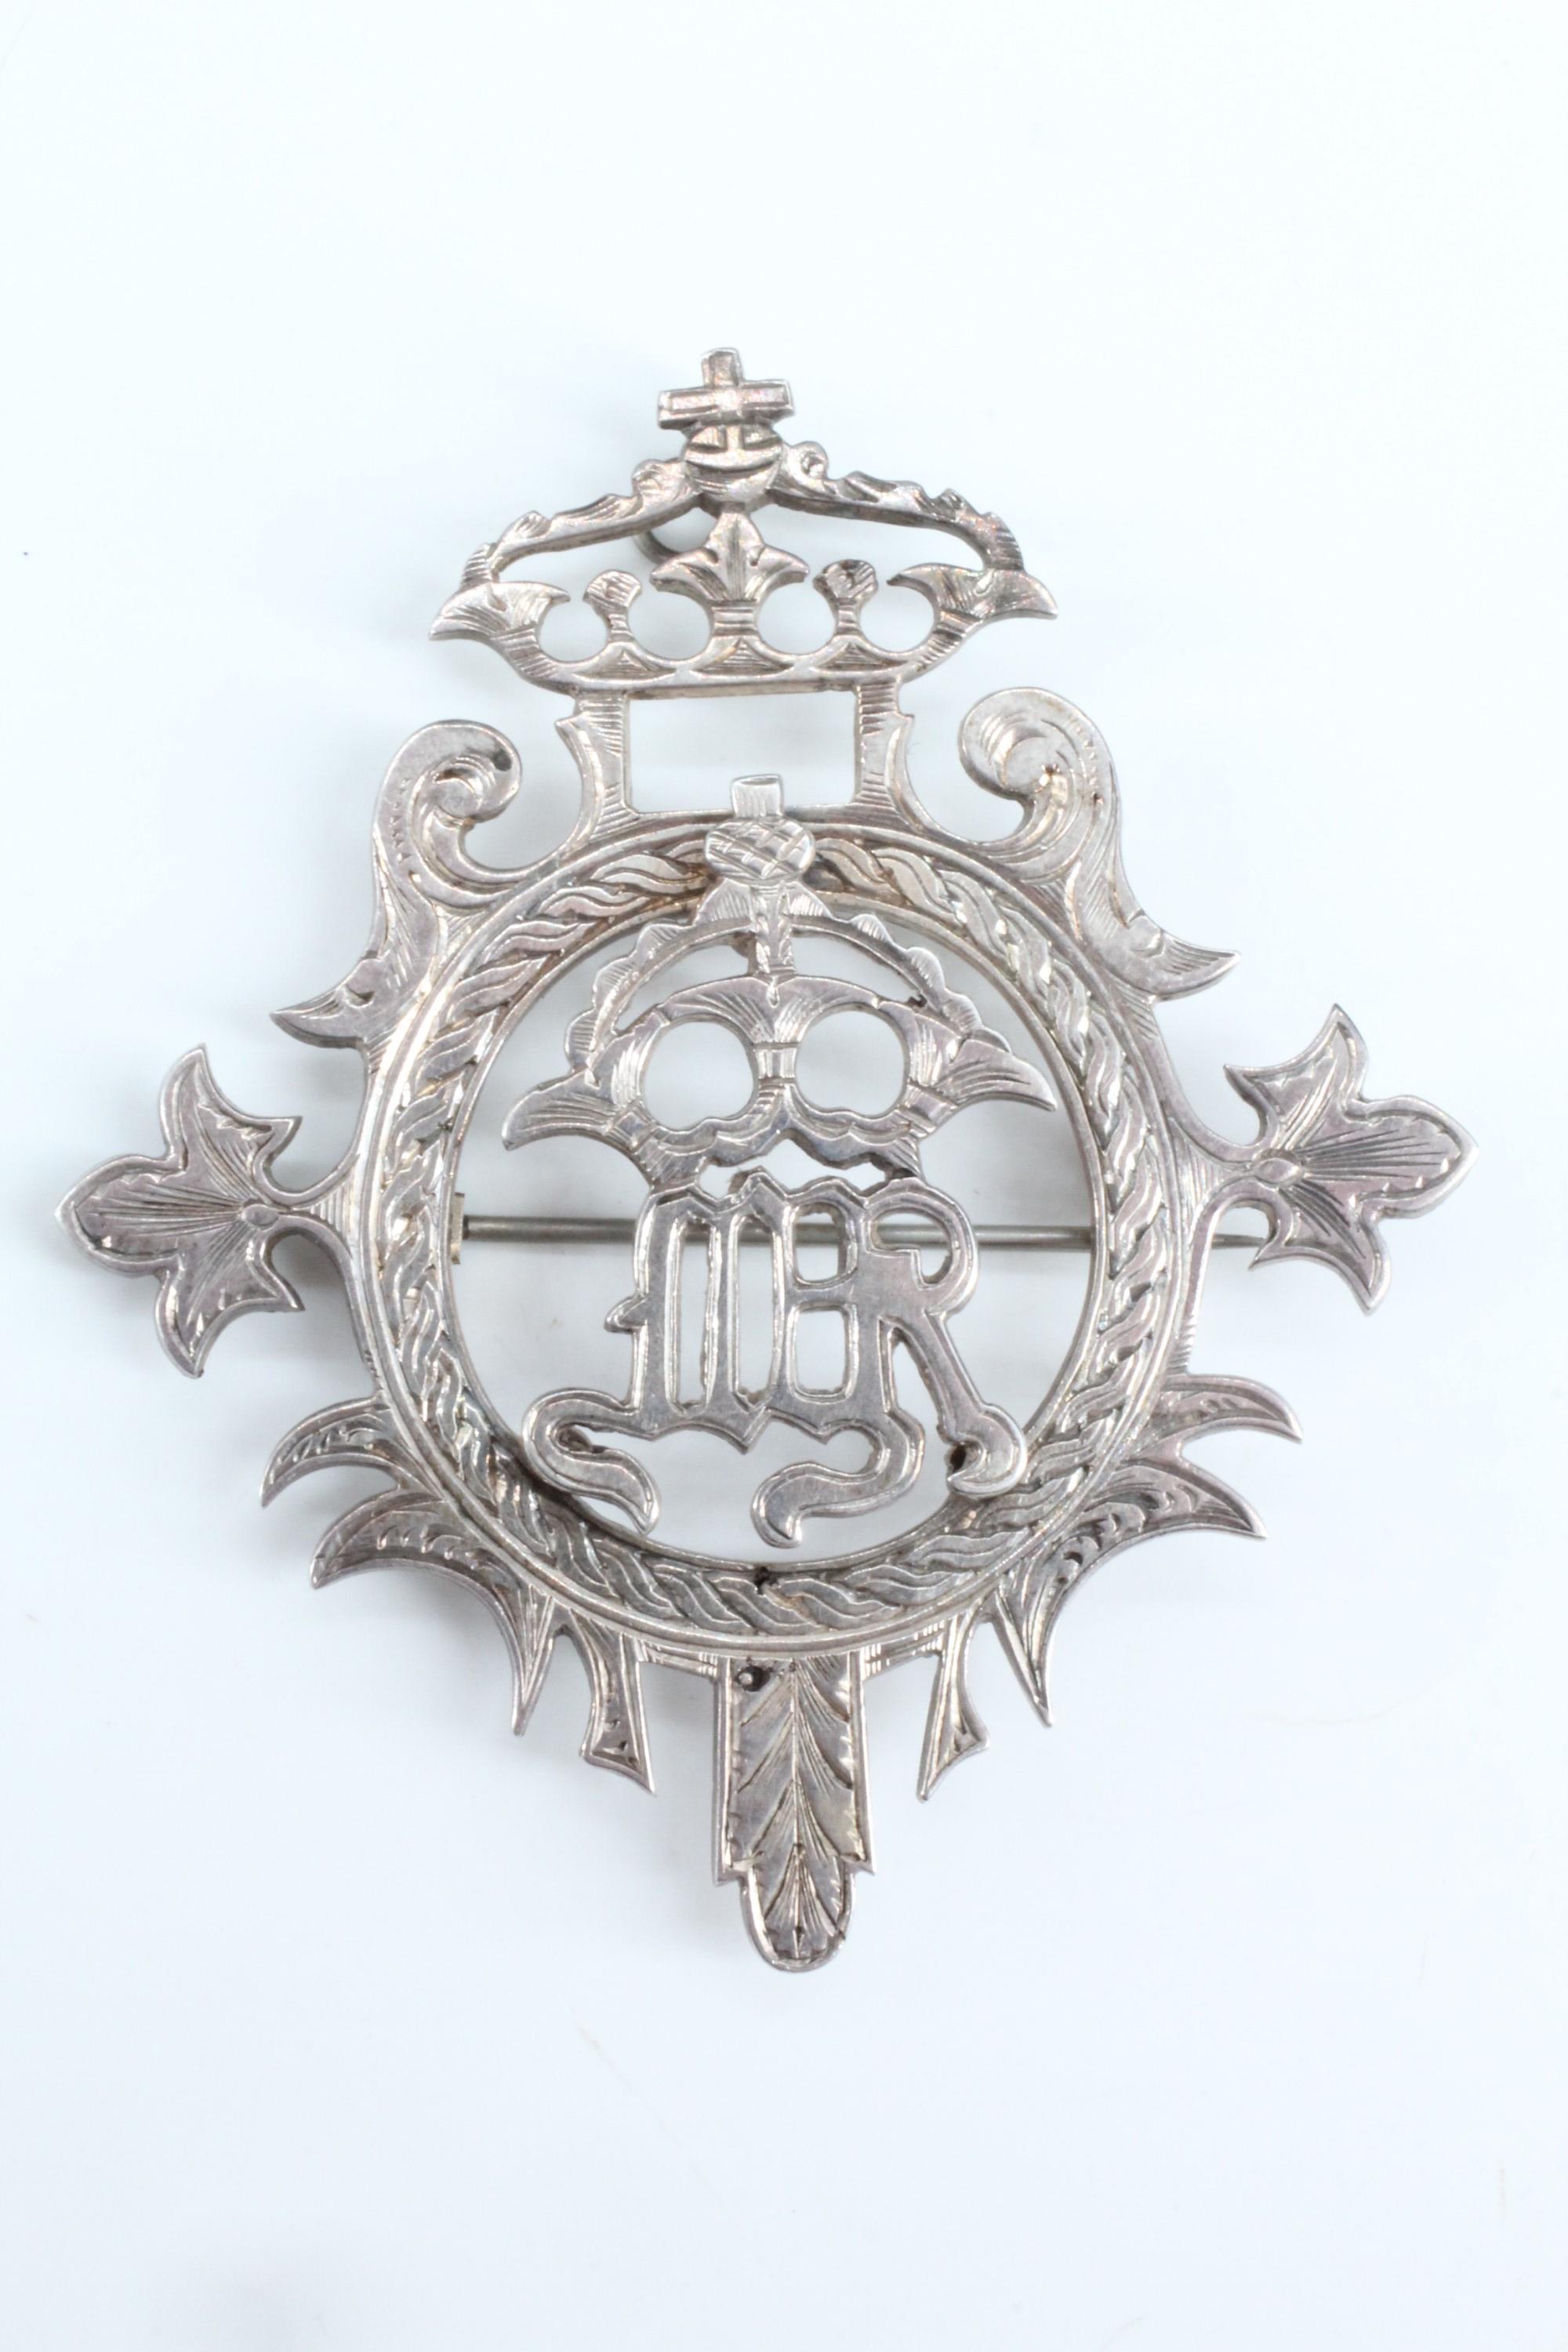 A Victorian Scottish provincial silver brooch, Scottish Renaissance inspired, fret worked and